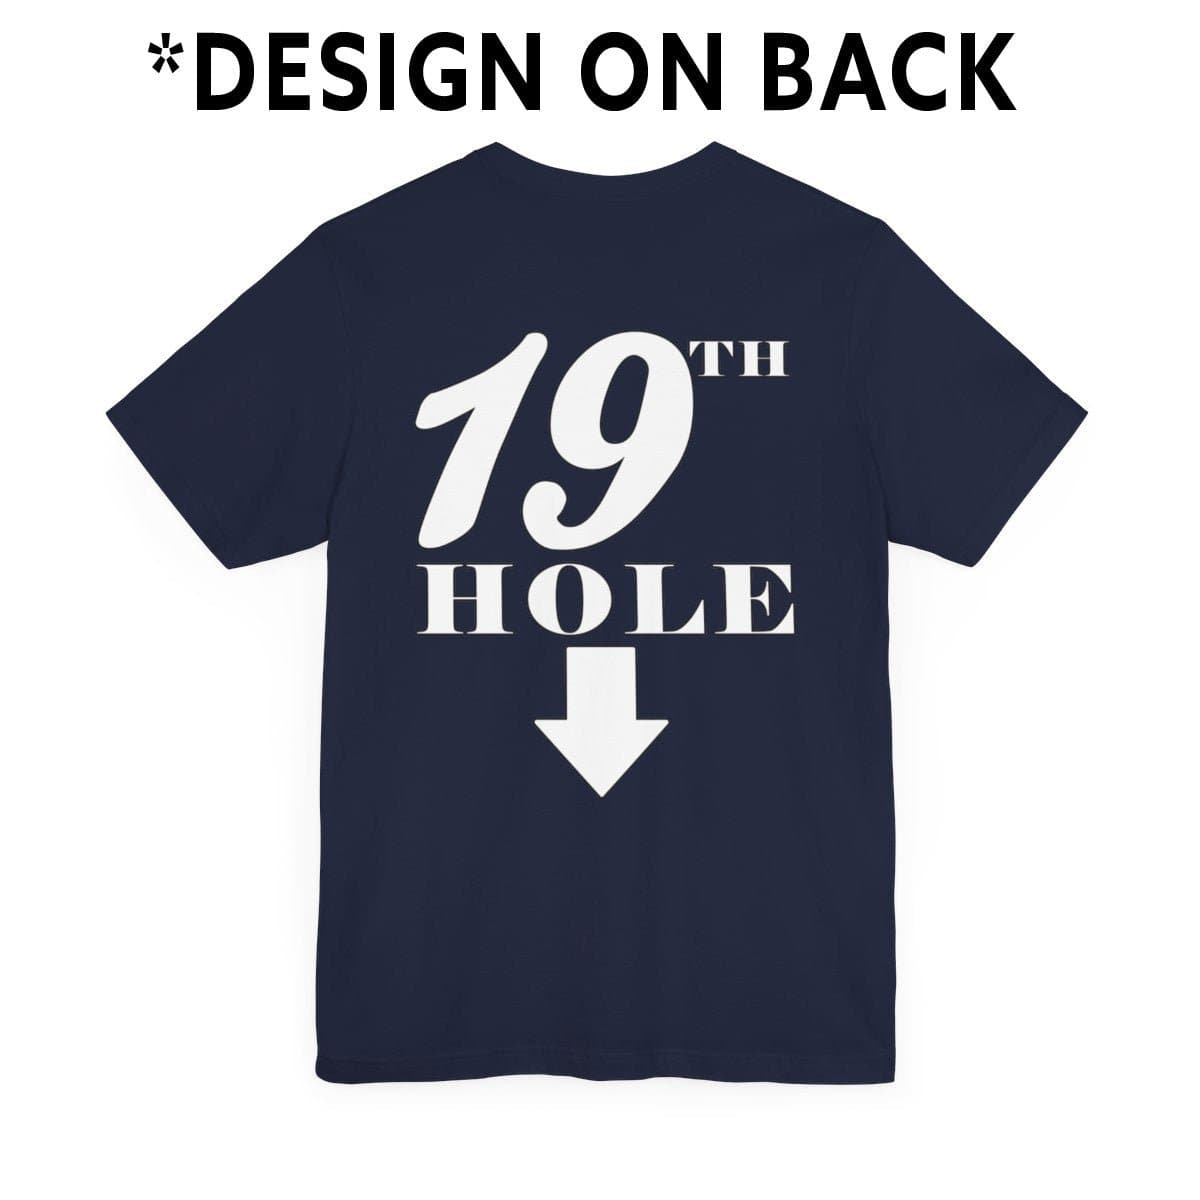 19th Hole - * Print on Back T-shirt in the color: Navy - Kaspers Tees